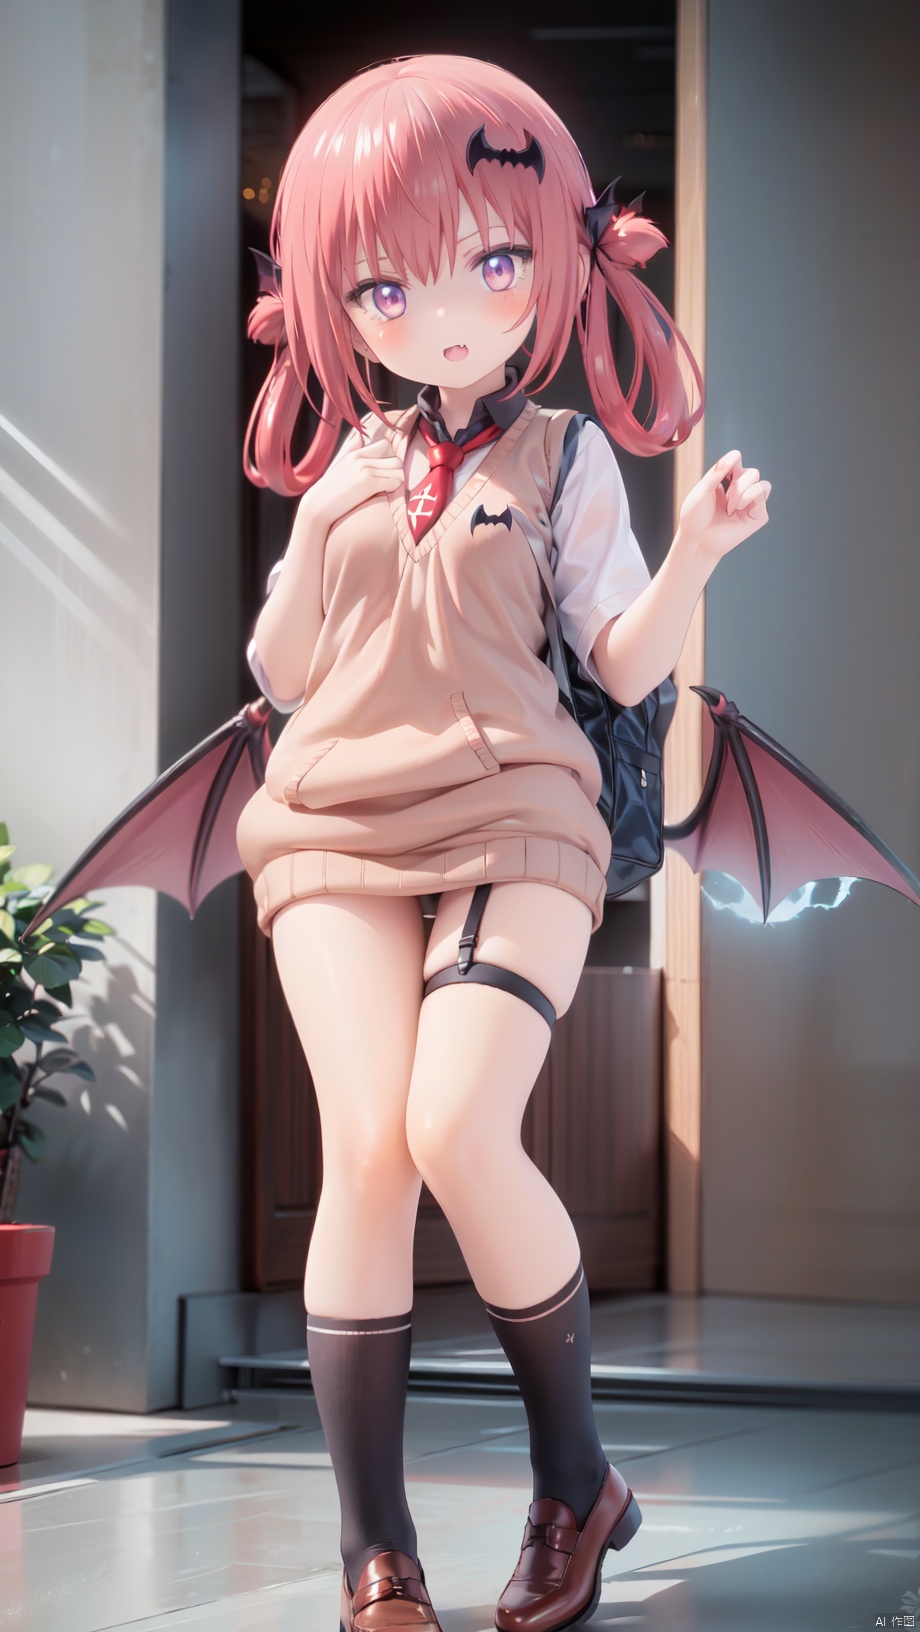 missionary,Satanichia Kurumizawa Mcdowell,loli,beautiful detailed girl,narrow waist,very small breasts,Glowing skin,Delicate cute face,school uniform,sweater vest,red necktie,fine fabric emphasis,ornate clothes,red eyes eyes,beautiful detailed eyes,glowing eyes,(raised eyebrow),((red hair)),((long hair,bat wings hair ornament)),Glowing hair,Extremely delicate hair,Thin leg,white legwear garter,beautiful detailed fingers,Slender fingers,steepled fingers,Shiny nails,(standing,hands up,art shift,hands next face),mischievous smile(expression),open mouth,tongue out,fangs out,beautiful detailed mouth,looking at viewer,melon bread(ornament),school connection,patio,hyper realistic,magic,8k,incredible quality,best quality,masterpiece,highly detailed,extremely detailed CG,cinematic lighting,backlighting,full body,high definition,detail enhancement,(perfect hands, perfect anatomy),detail enhancement